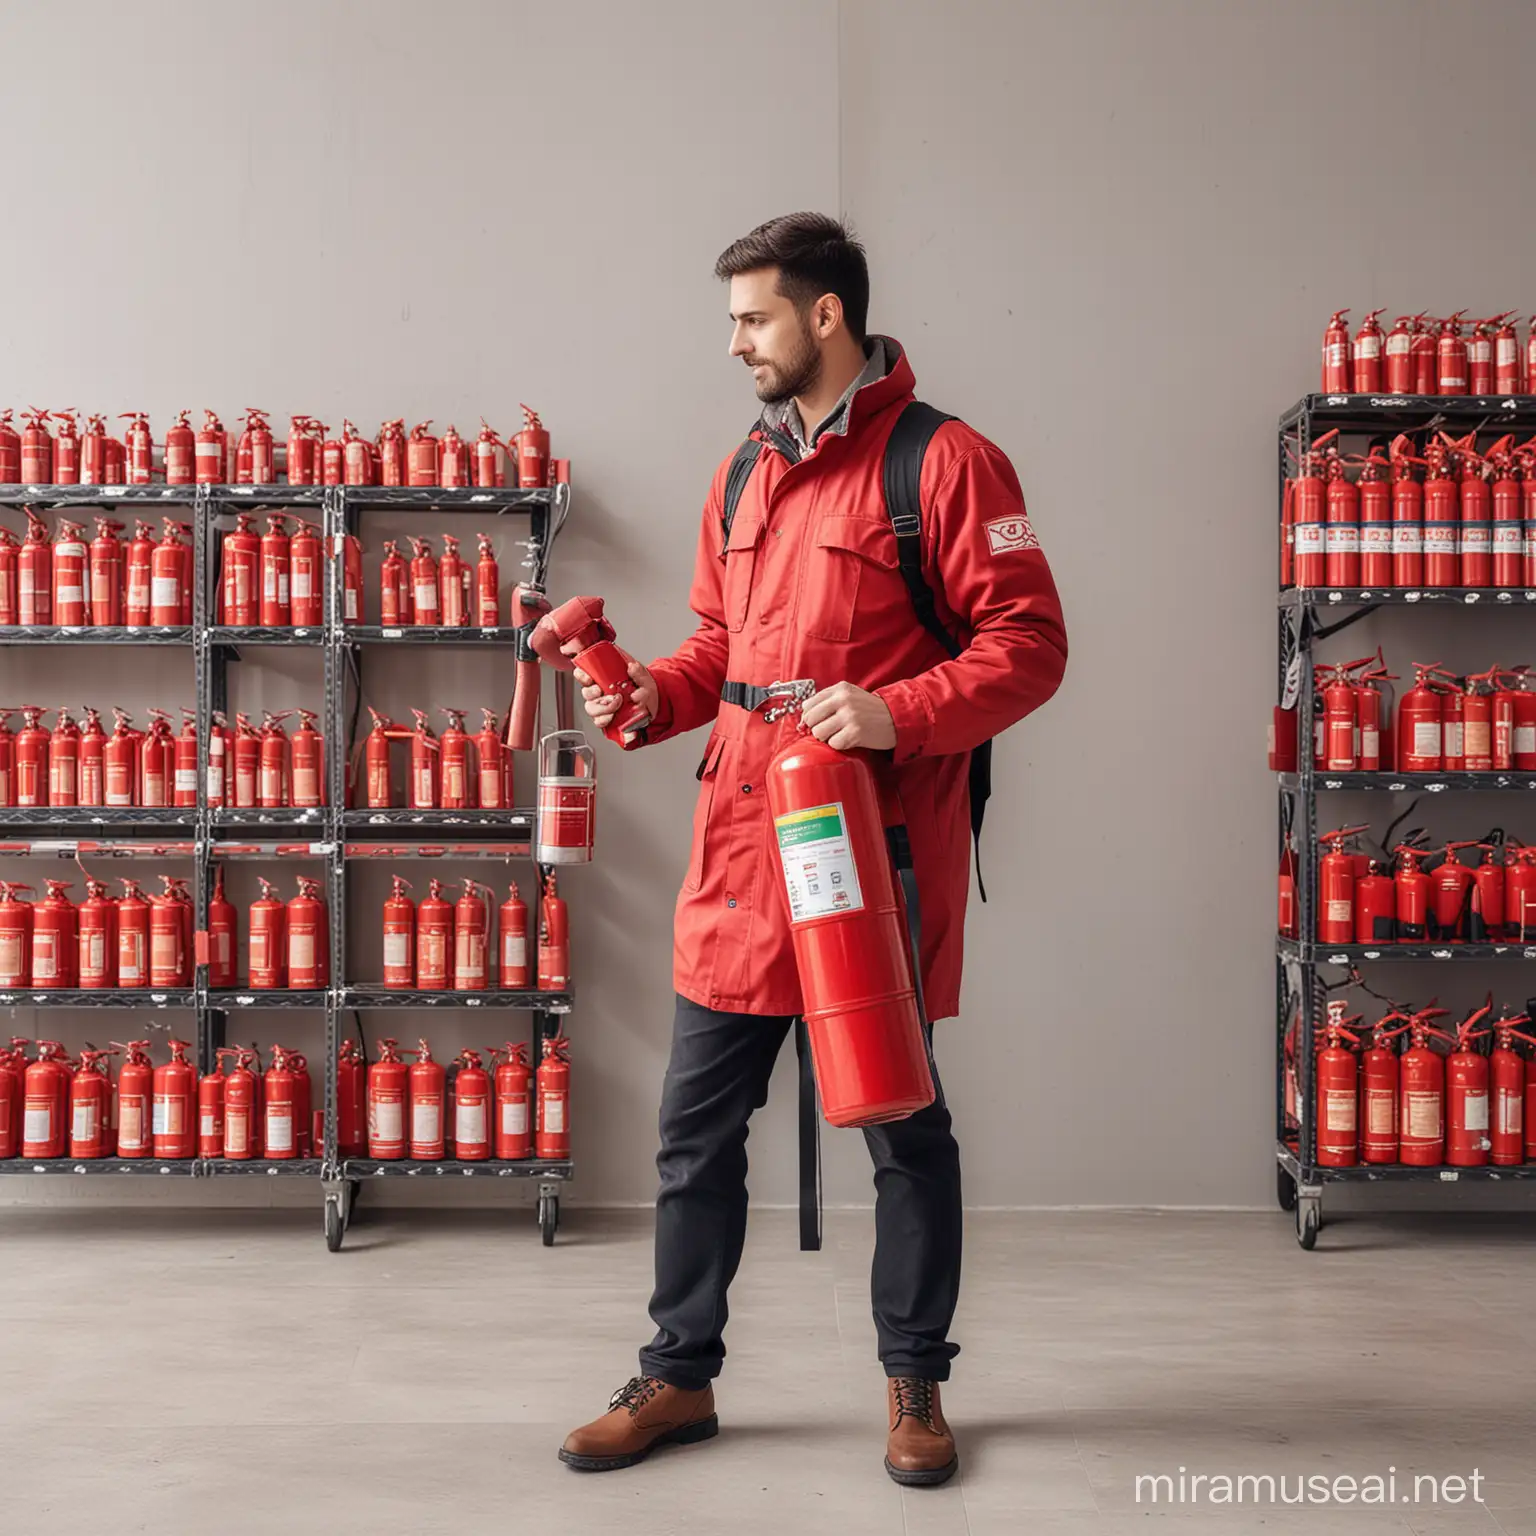 Template about person buying fire extinguisher